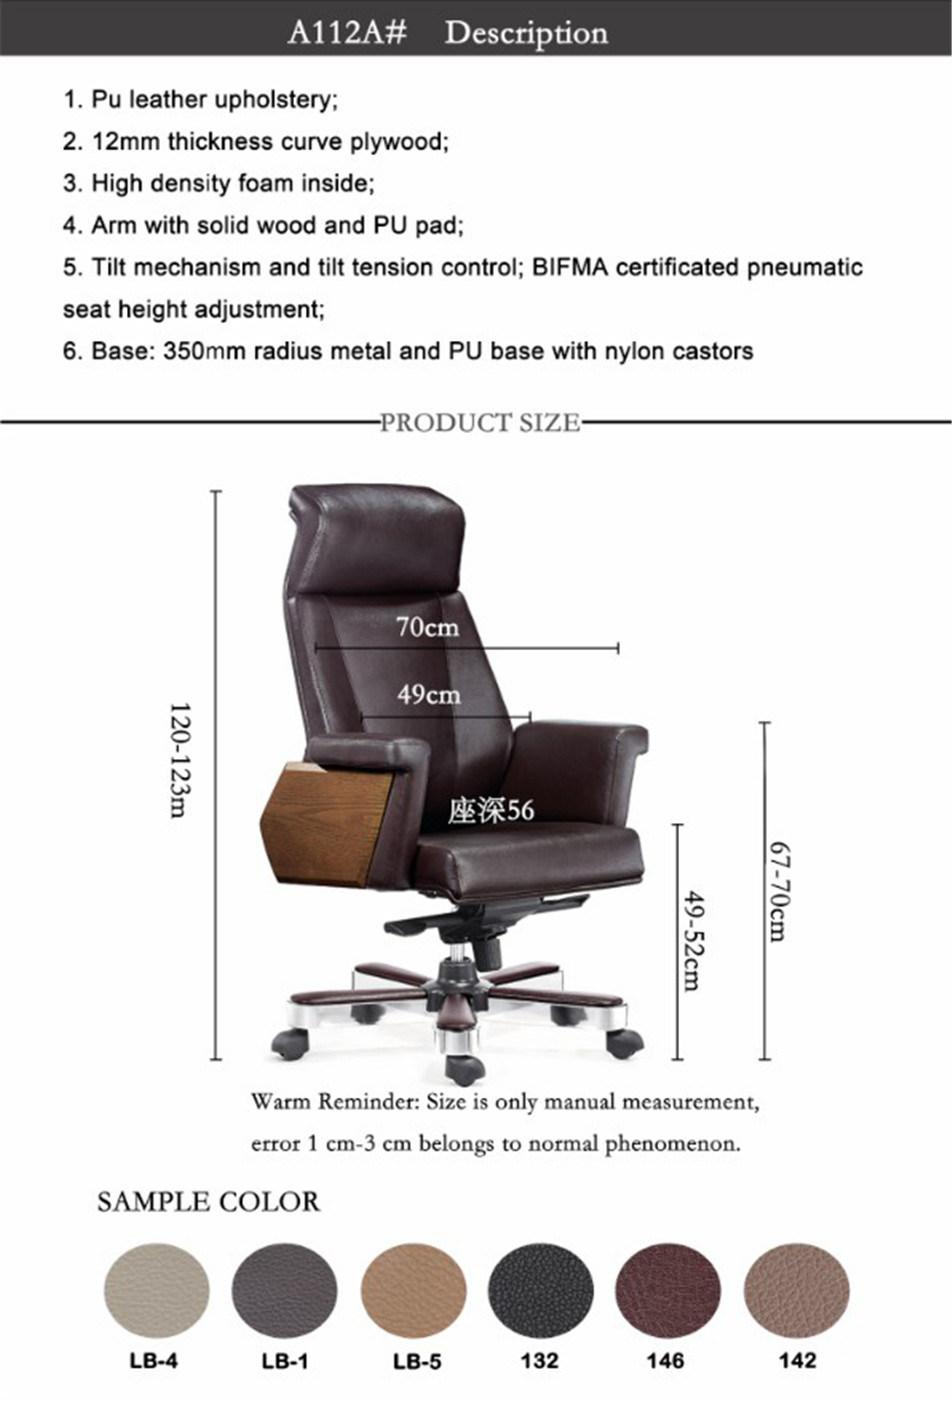 Big Size Office Furniture Meeting Room with 180 Deg Resilient Mechanism Office Chair Visitor Chair